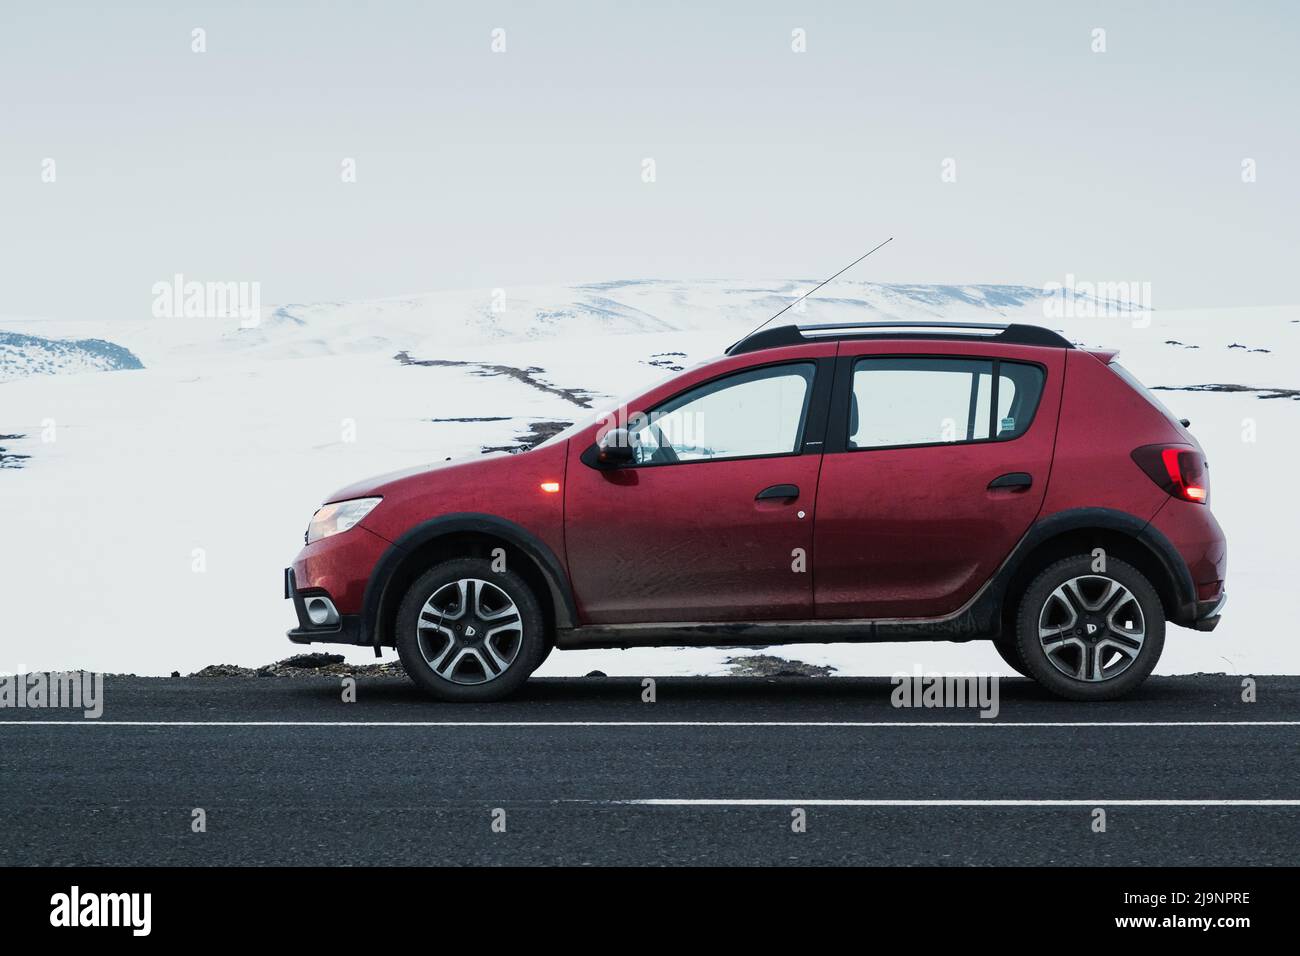 Kars, Turkey - February 25, 2022: Side view of a red colored Dacia brand Sandero model car paused on an asphalt road with a snowy background. Stock Photo